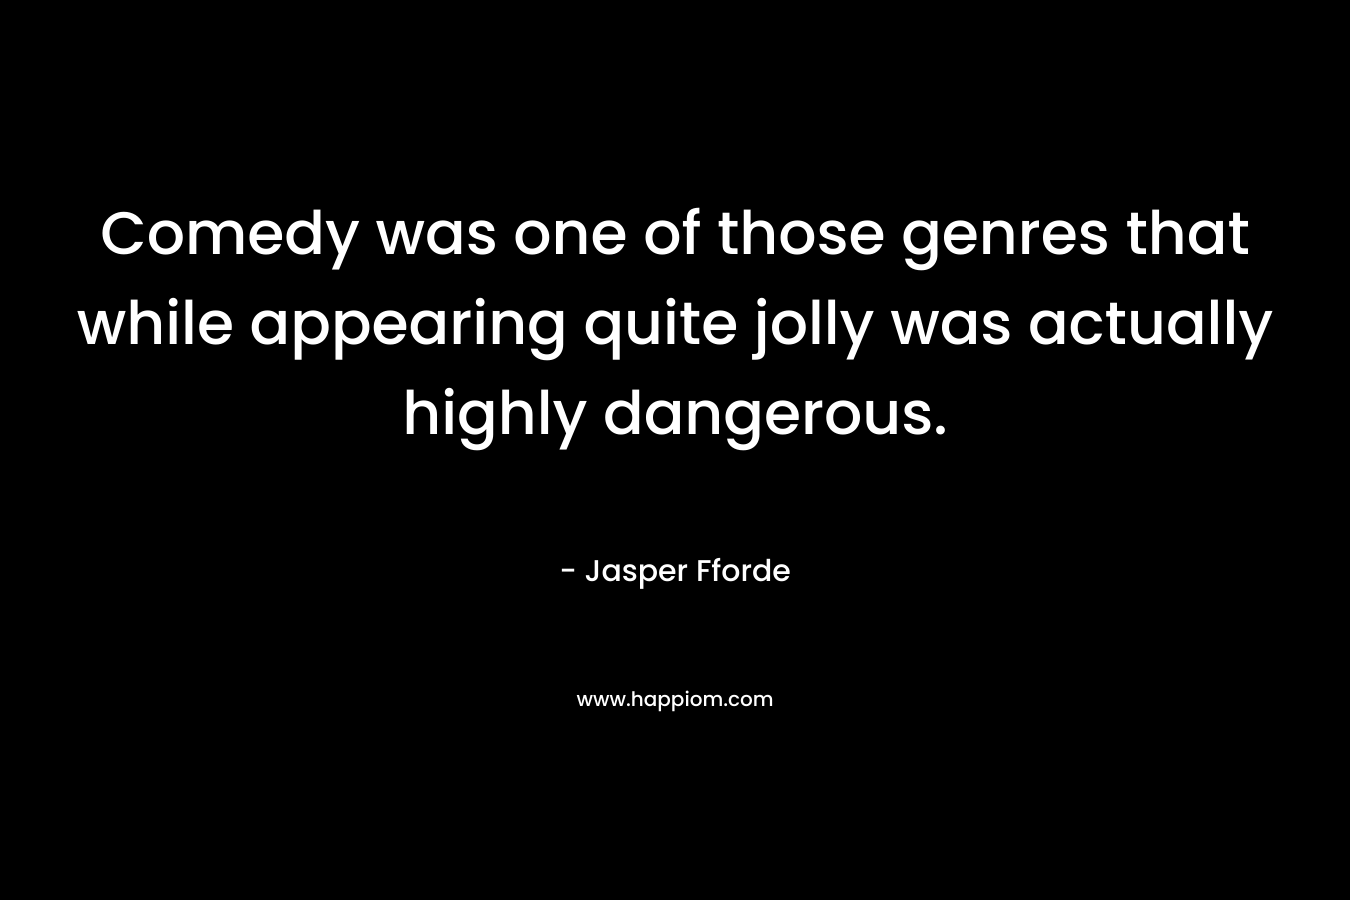 Comedy was one of those genres that while appearing quite jolly was actually highly dangerous.